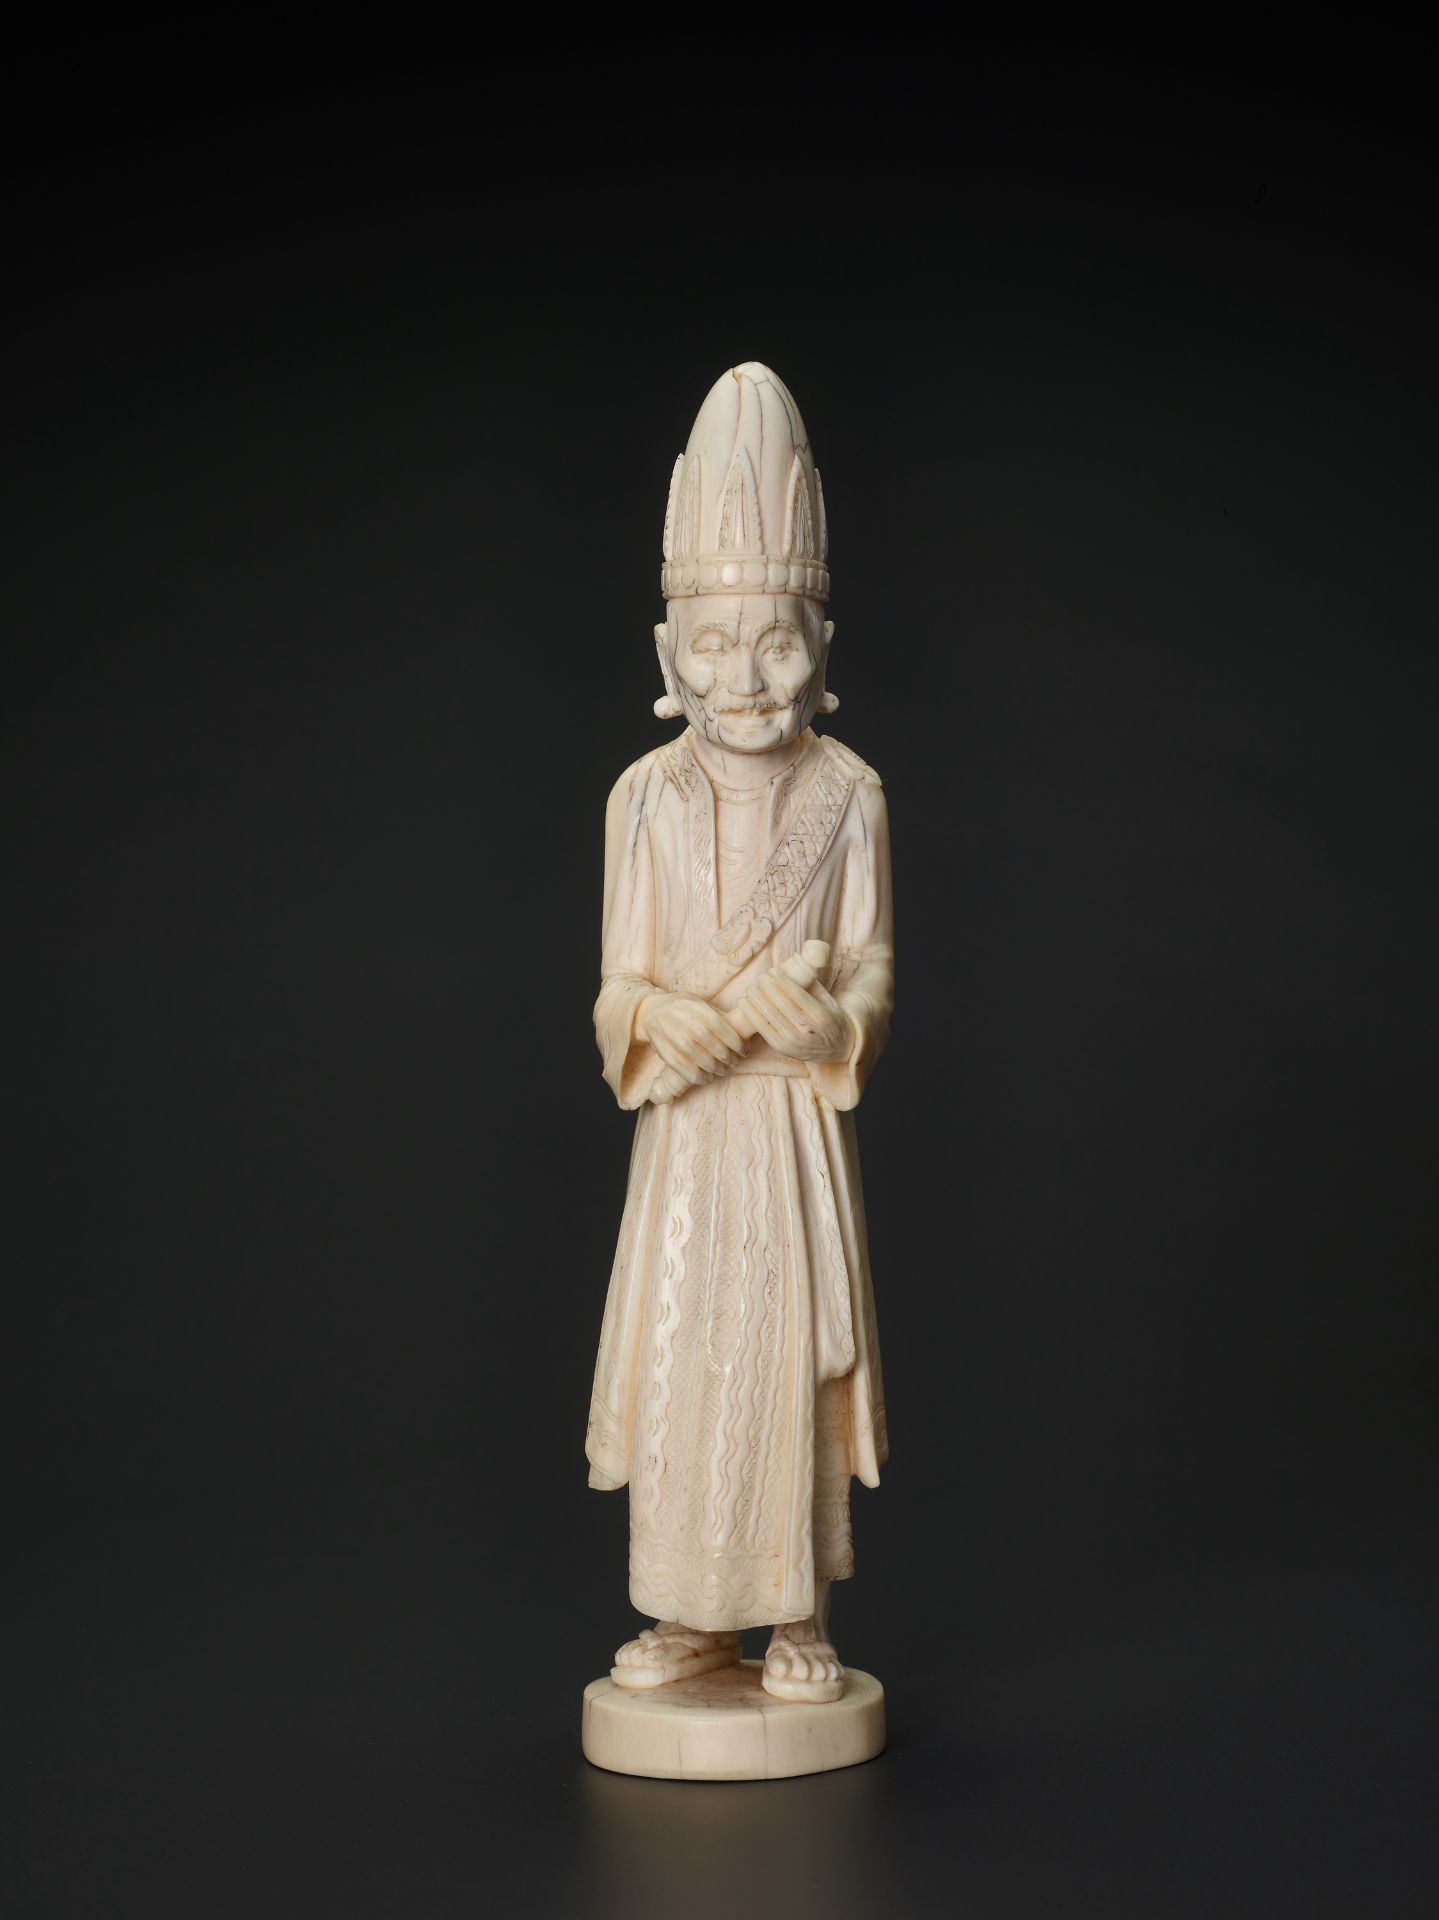 A 19TH CENTURY INDO-PERSIAN IVORY SCULPTURE OF A PRIEST - Image 5 of 6